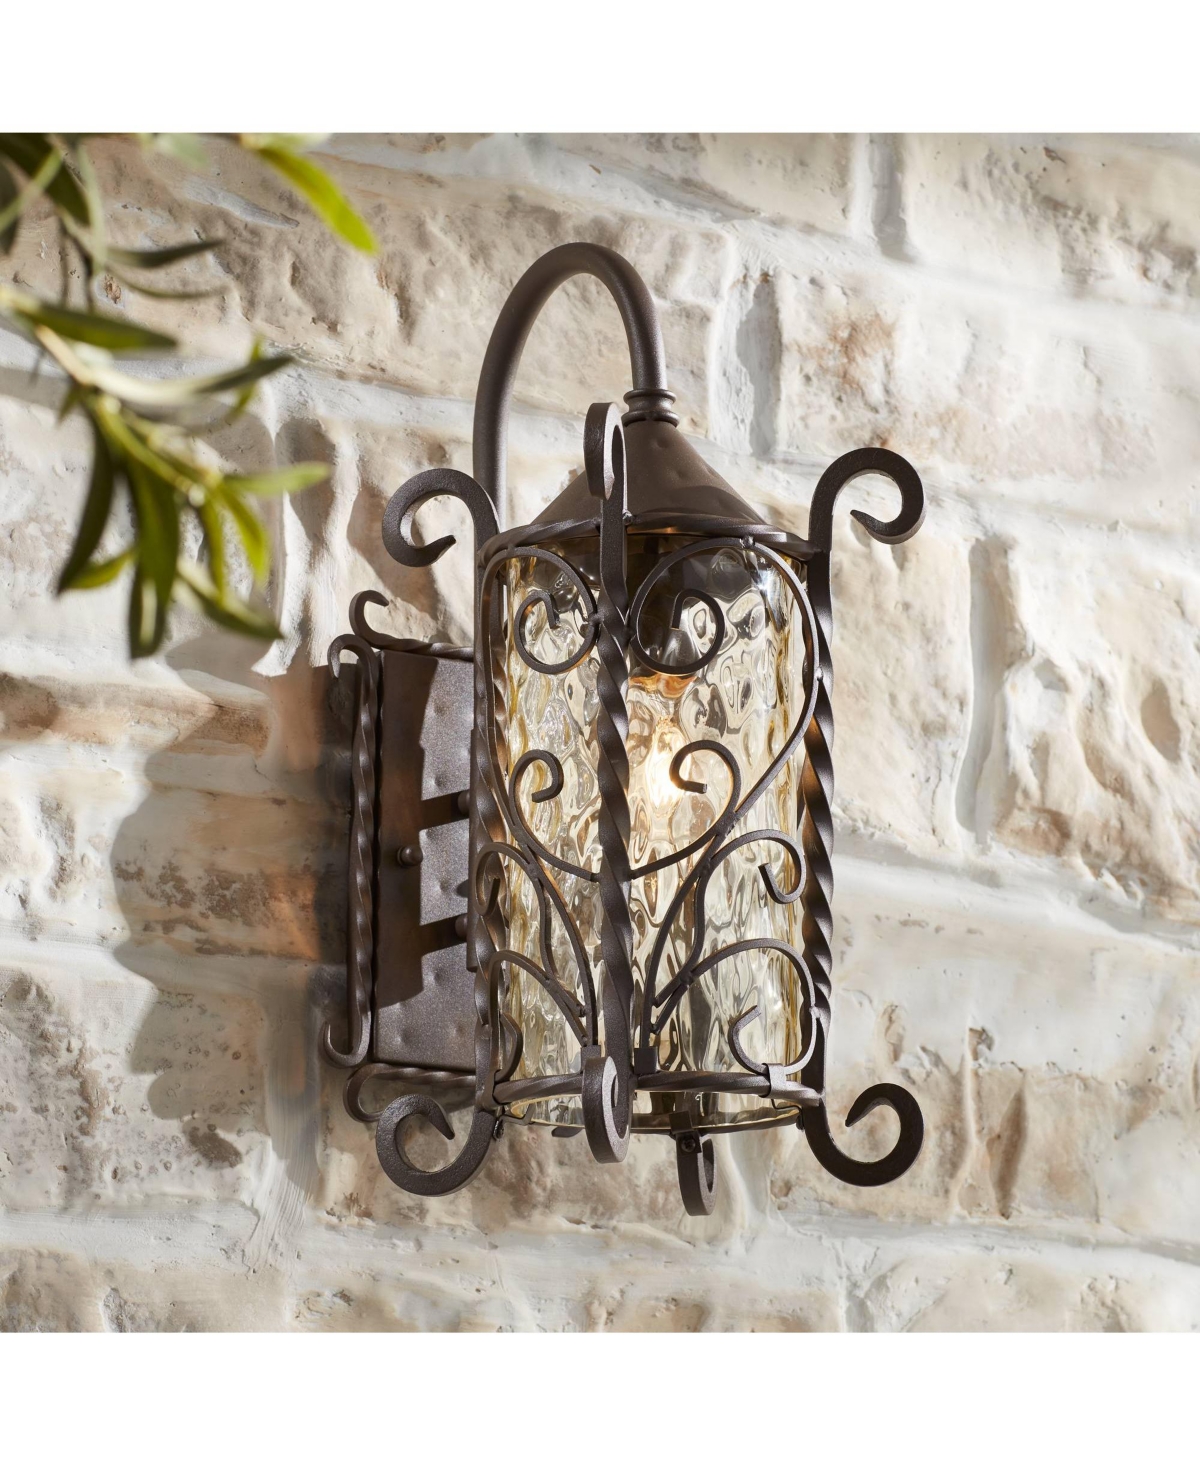 Casa Seville Rustic Outdoor Wall Light Fixture Dark Walnut Twists 18 1/2" Champagne Hammered Glass for Exterior House Porch Patio Outside Deck Garage